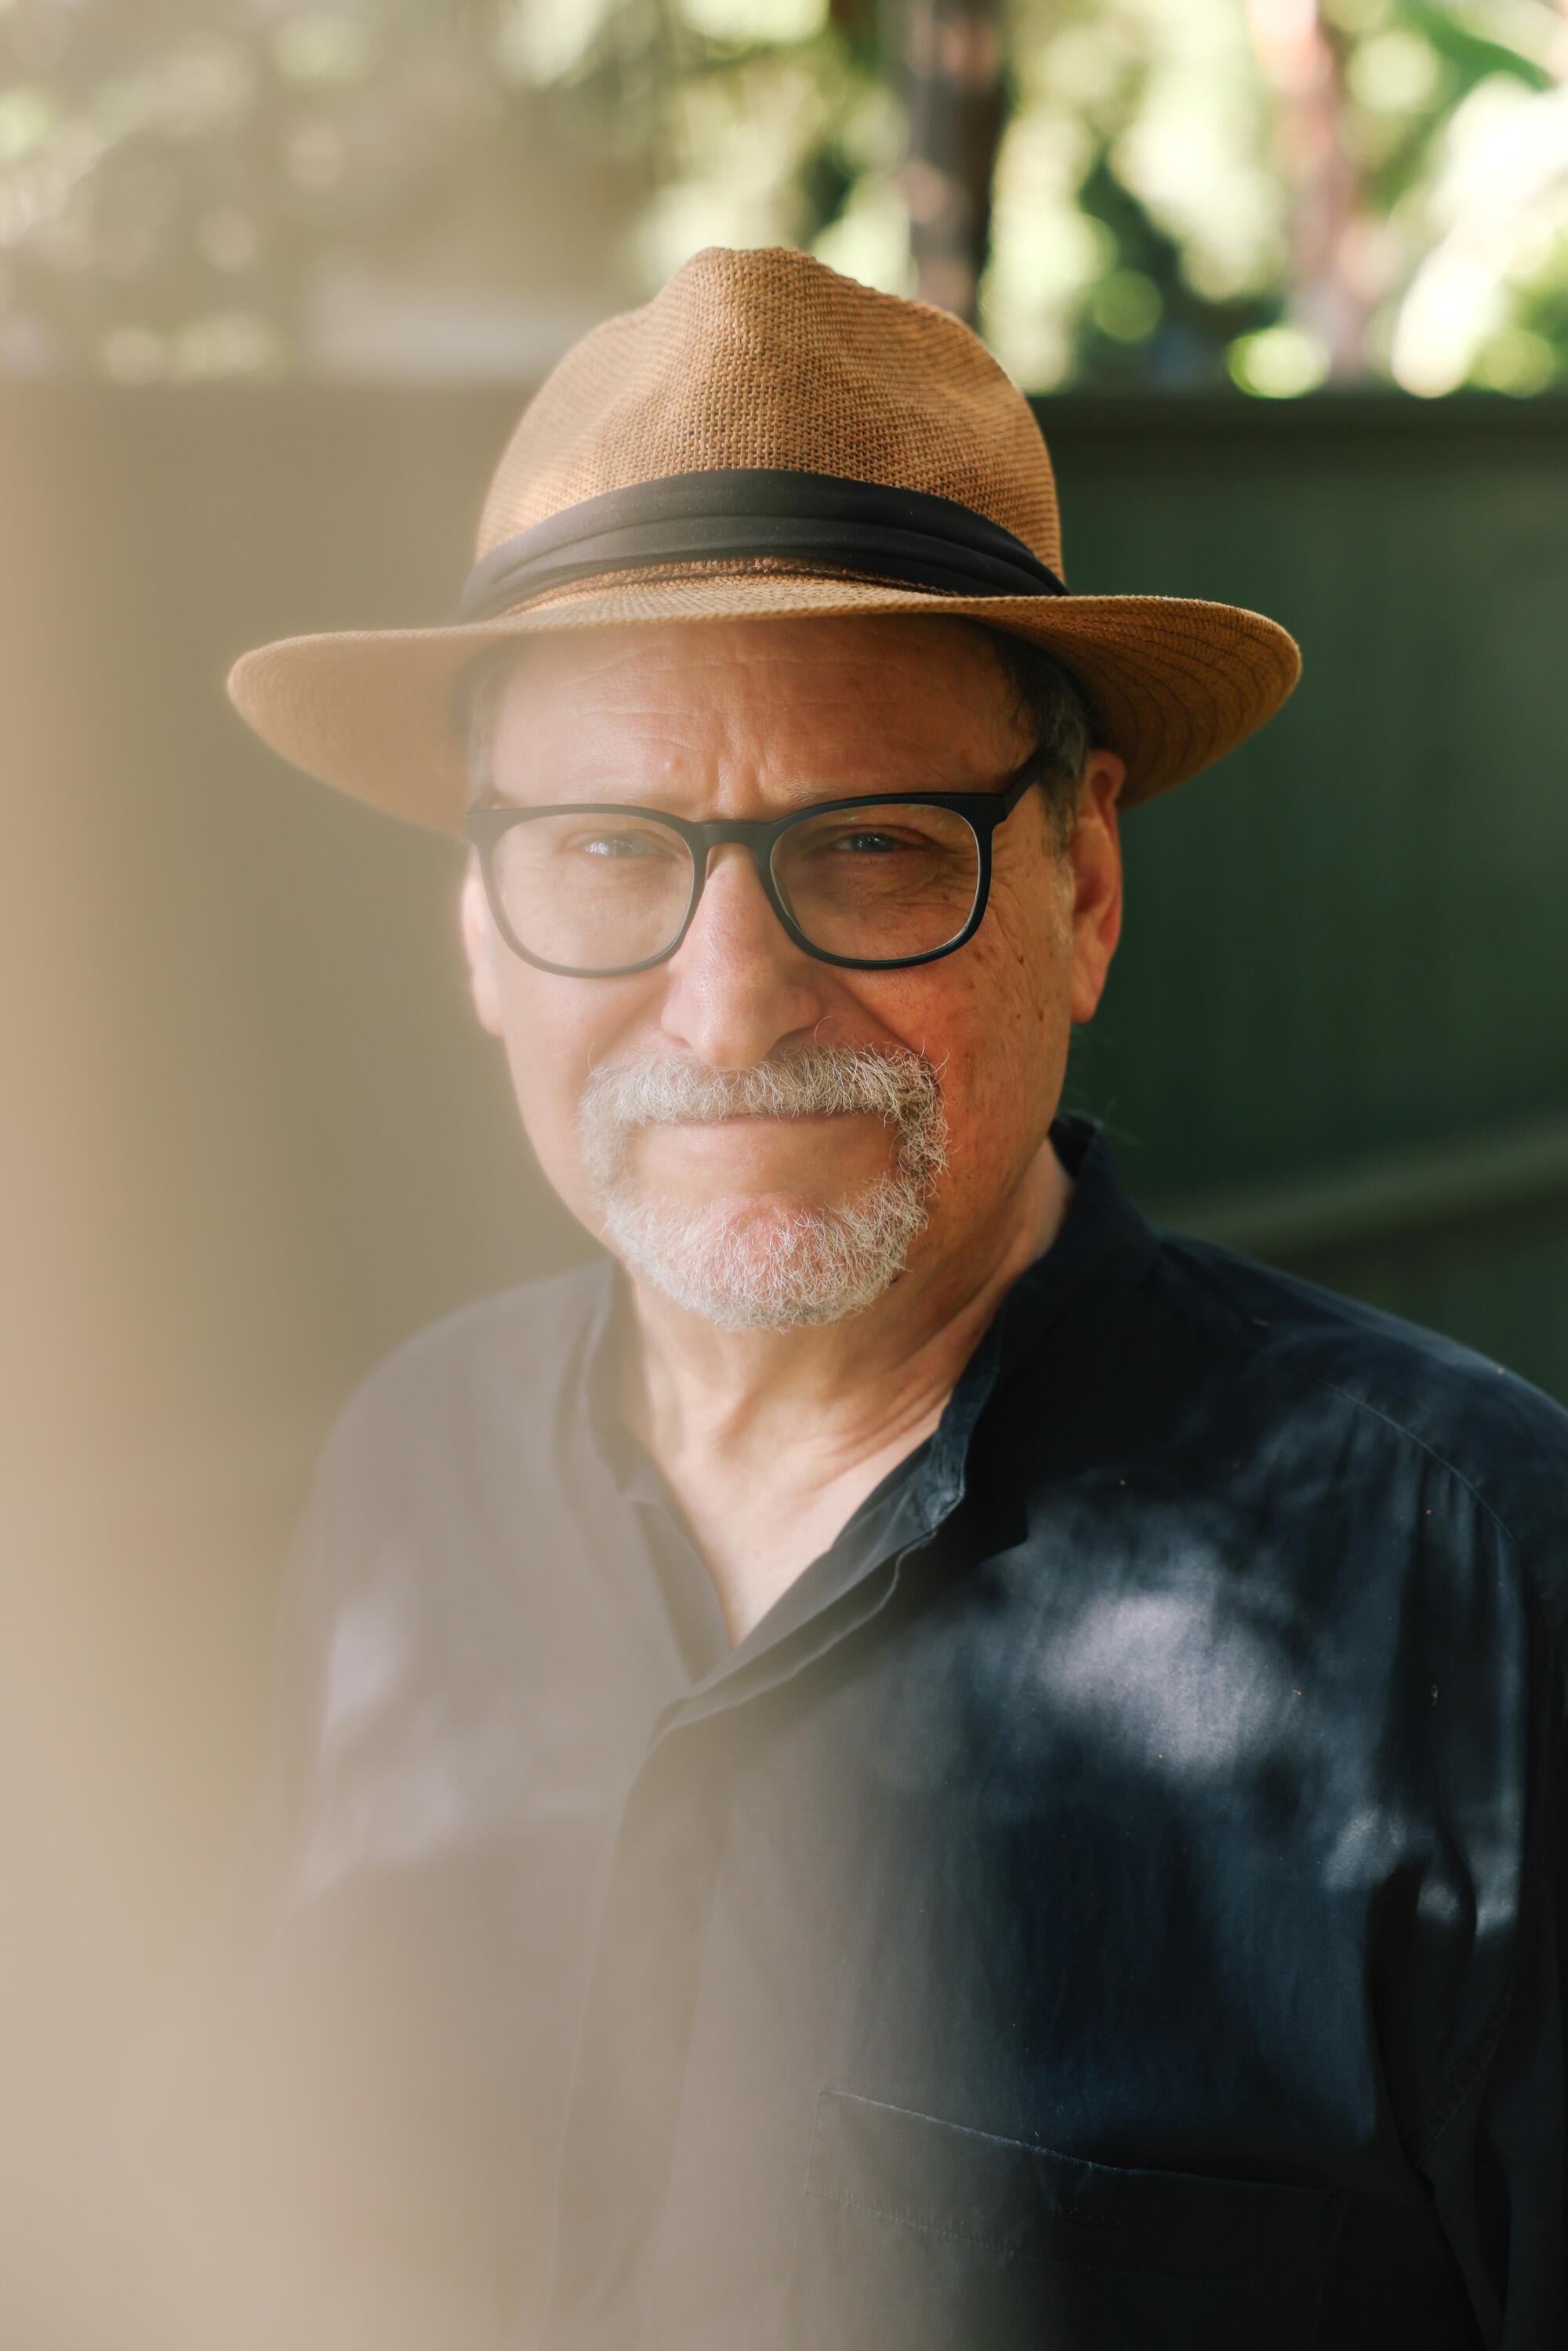 Tom Laichas poses for a portrait in a hat and glasses